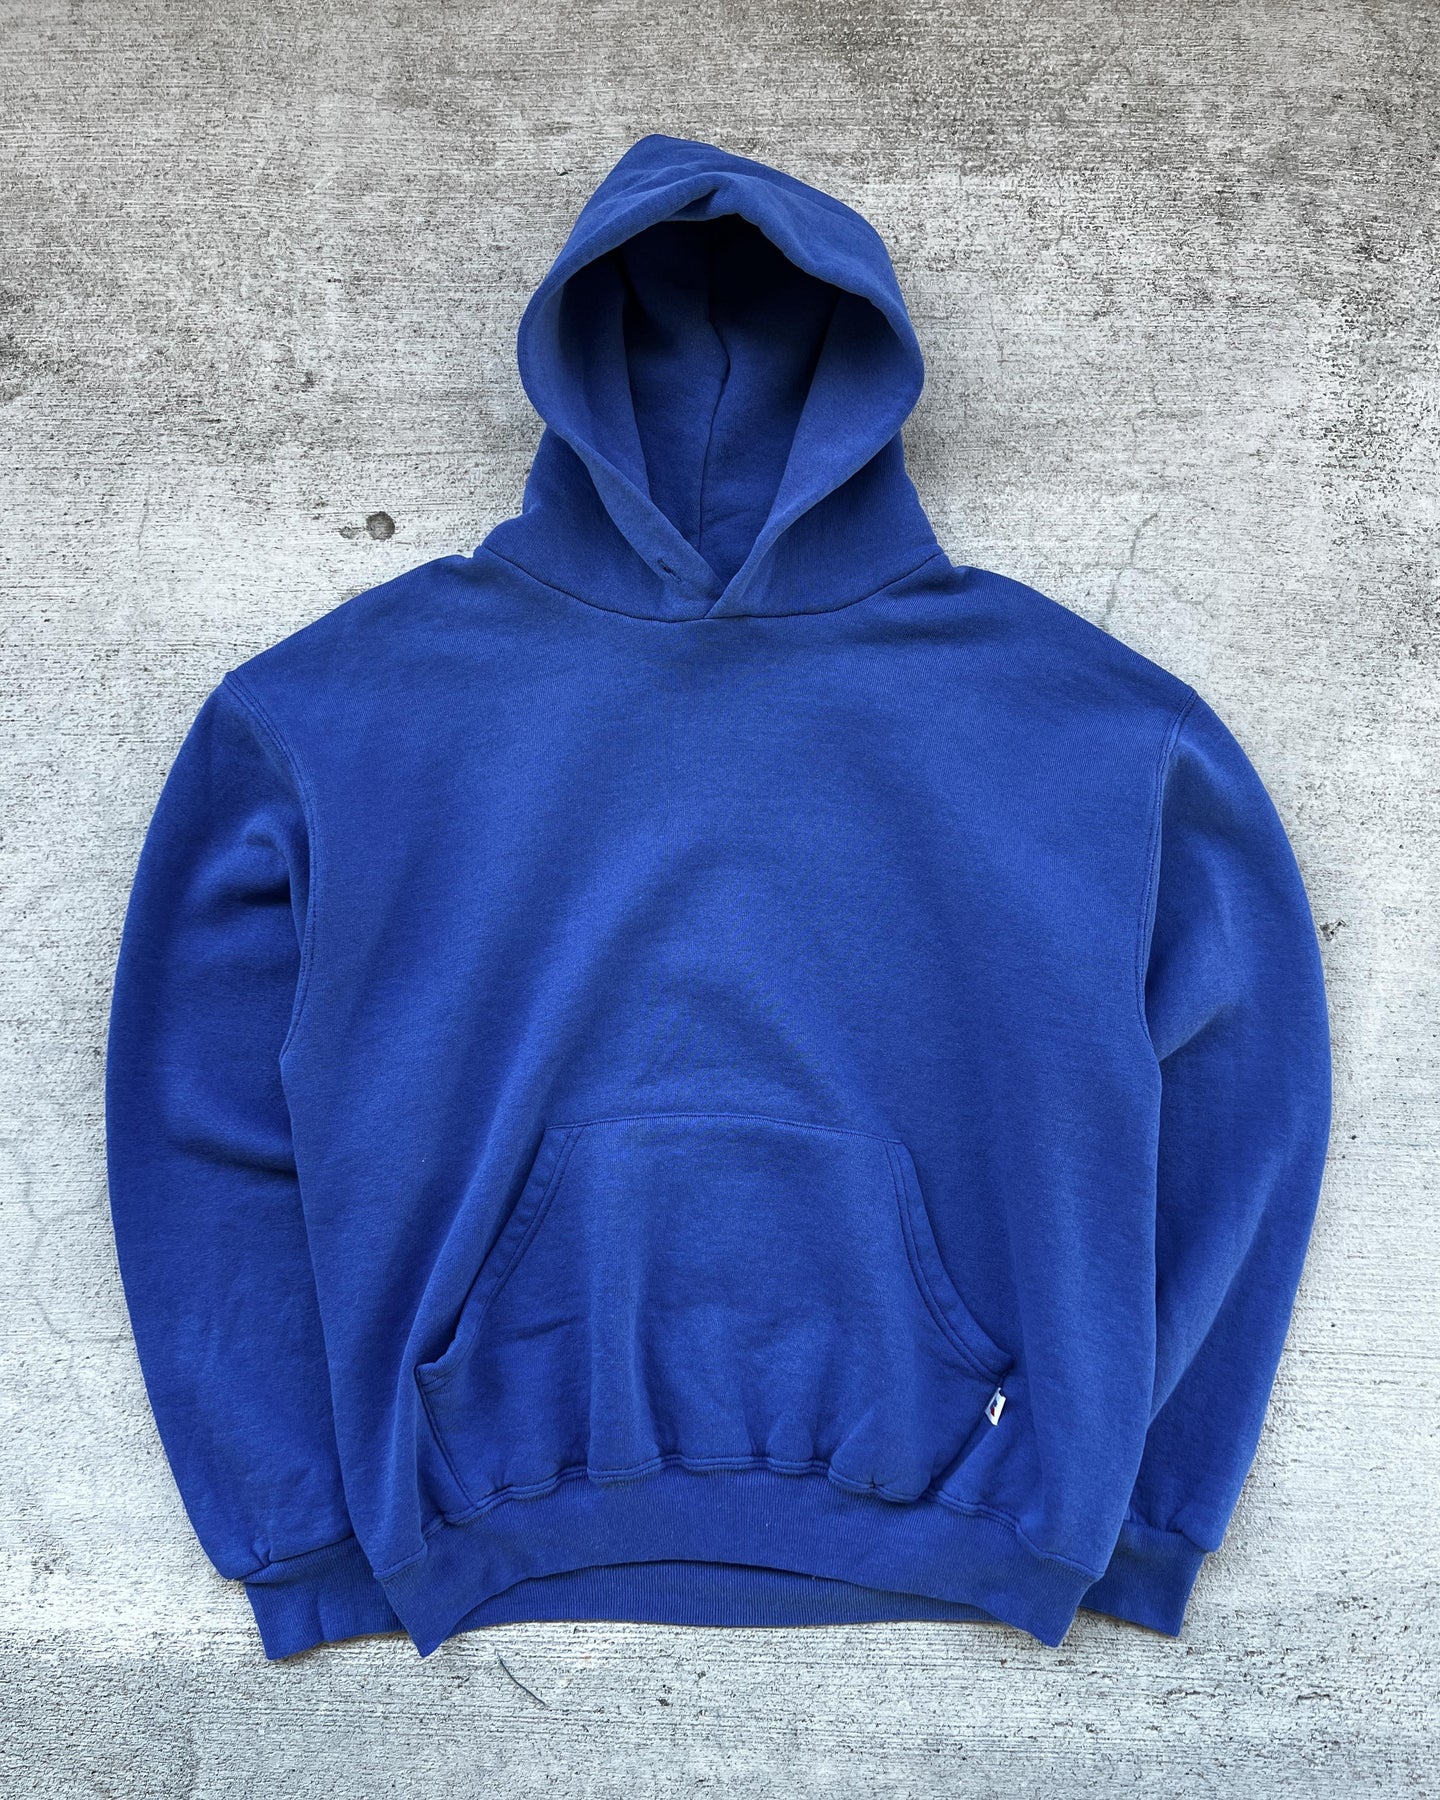 1990s Russell Athletic Royal Blue Hoodie - Size Large